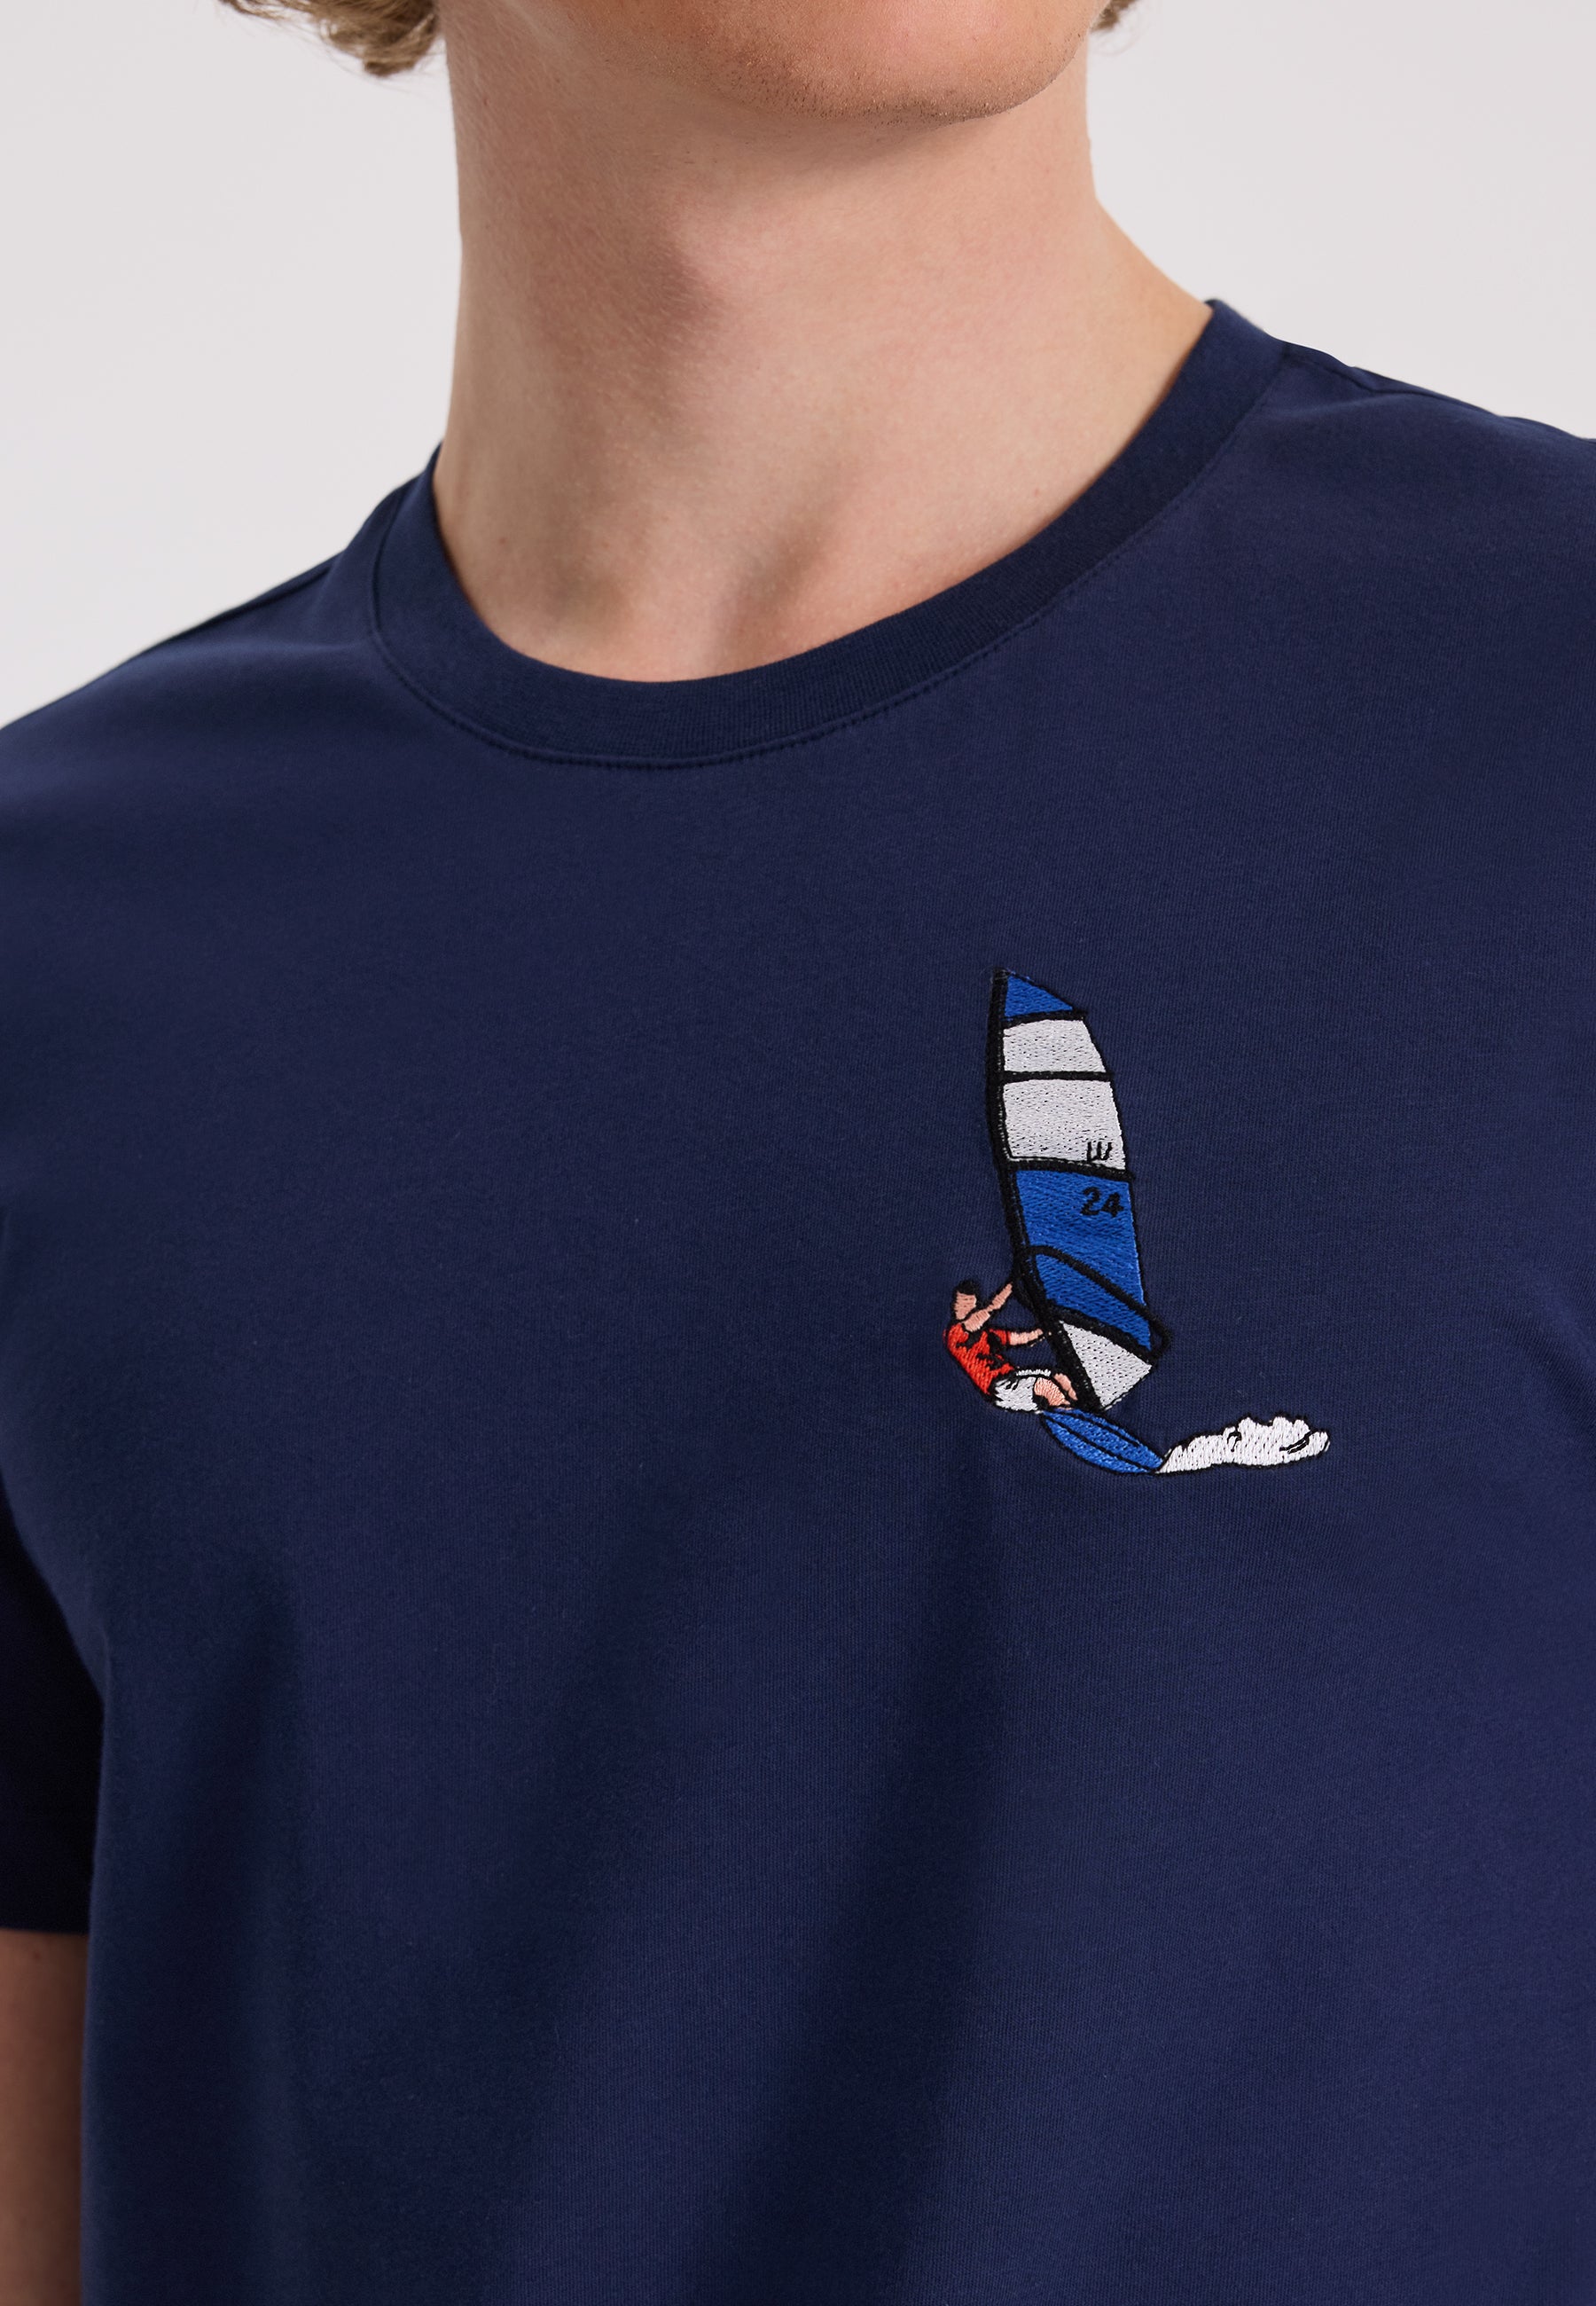 WMEMBROIDERY SURFER TEE in Naval Academy